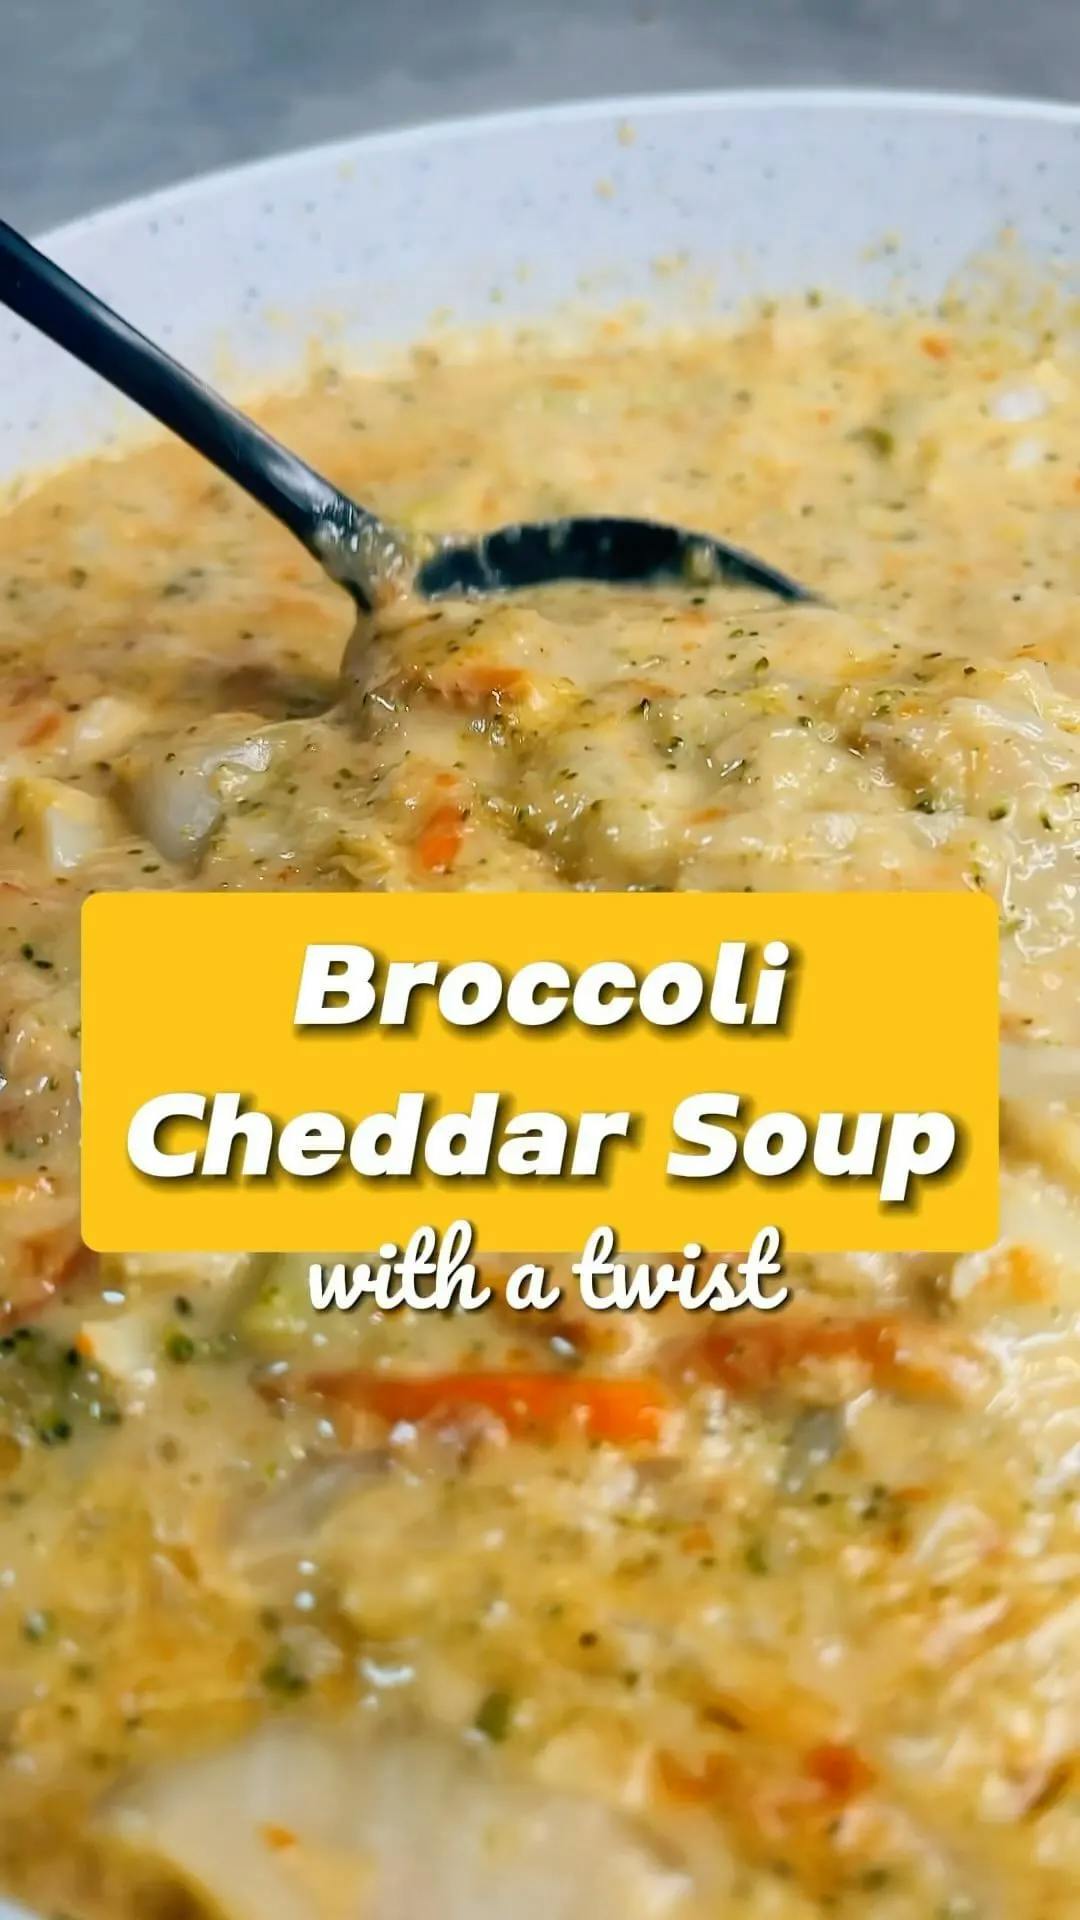 Picture for BROCCOLI CHEDDAR SOUP (with a twist)